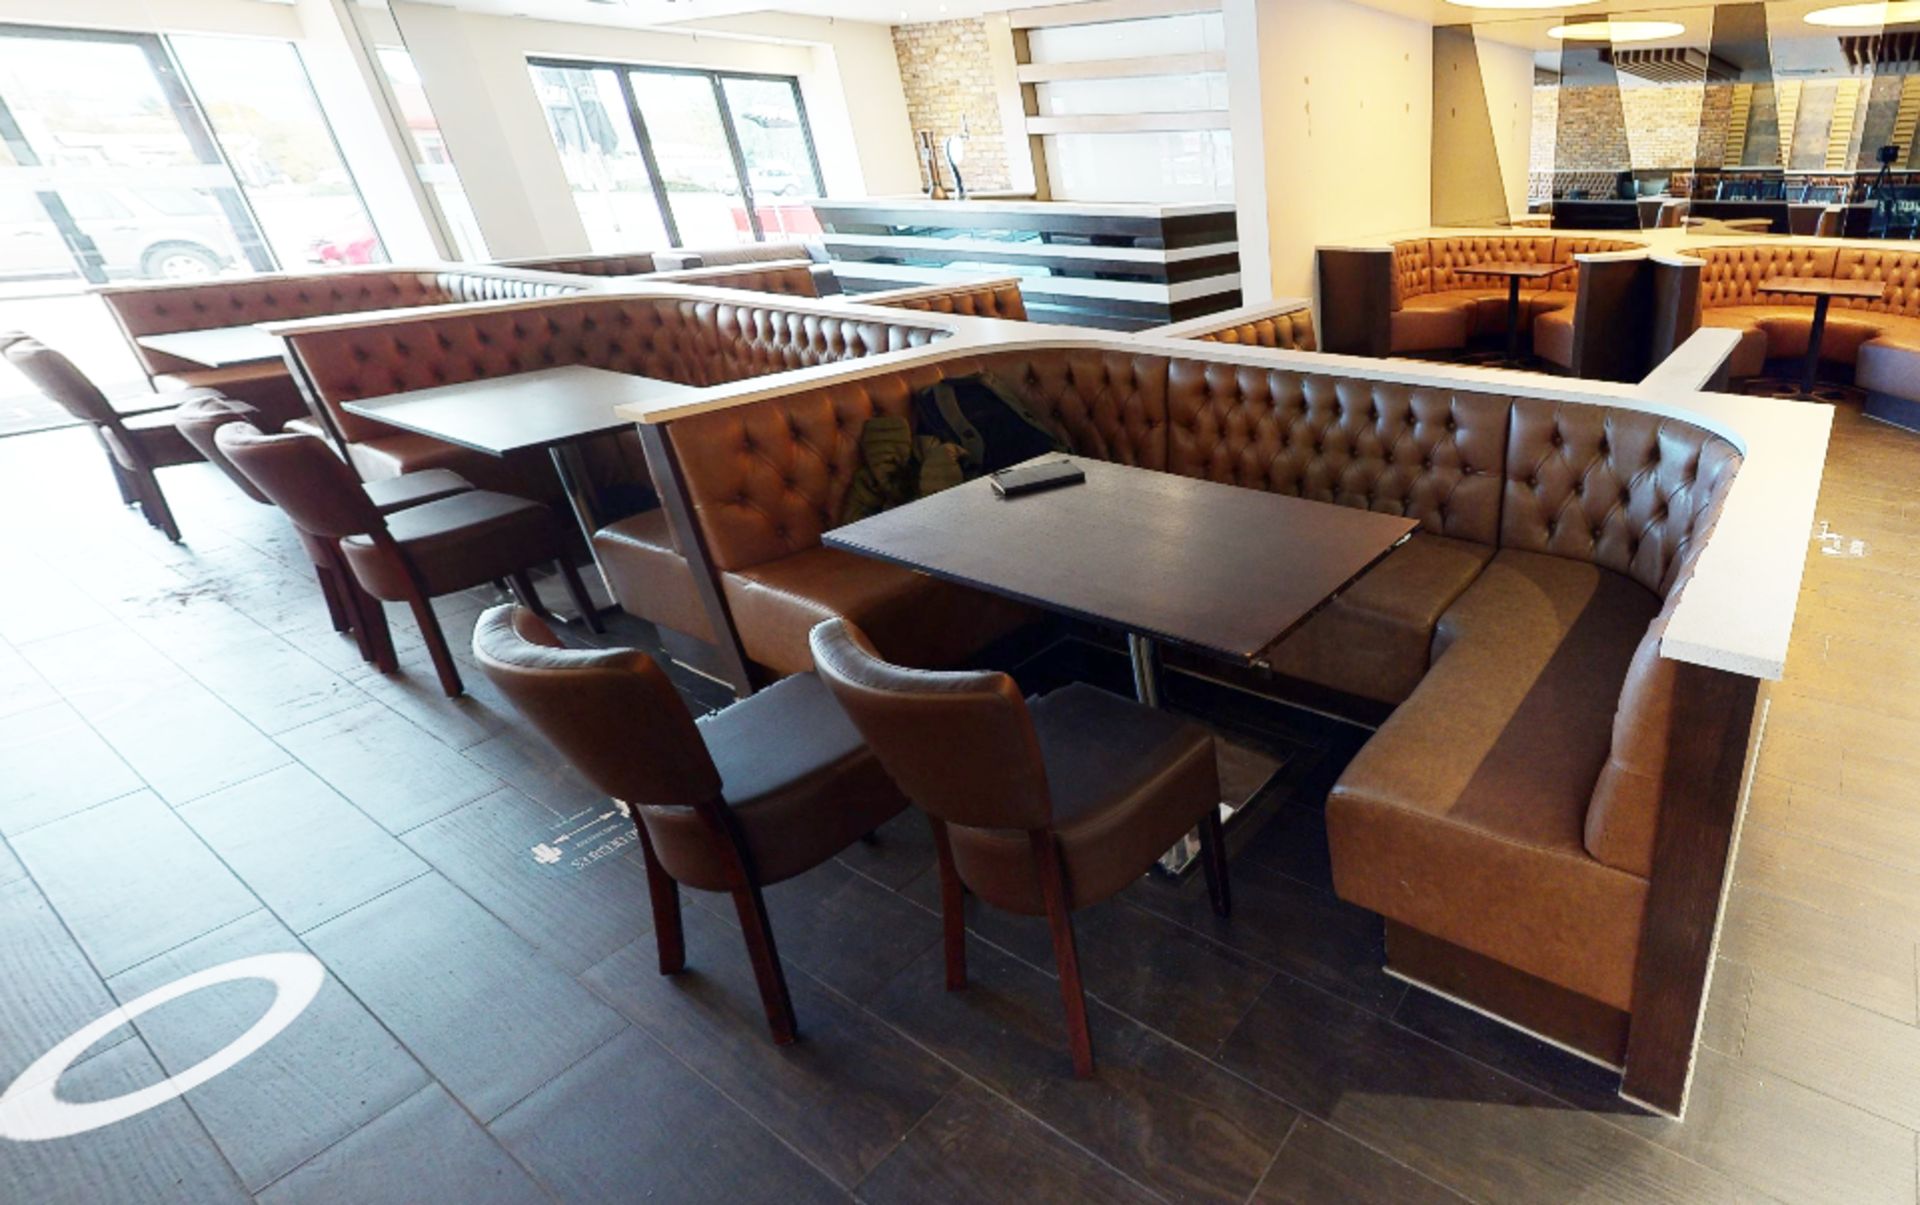 5 x Rectangular Restaurant Tables With Dark Wood Tops and Chrome Bases - Table Size 120 x 70 cms - - Image 2 of 4